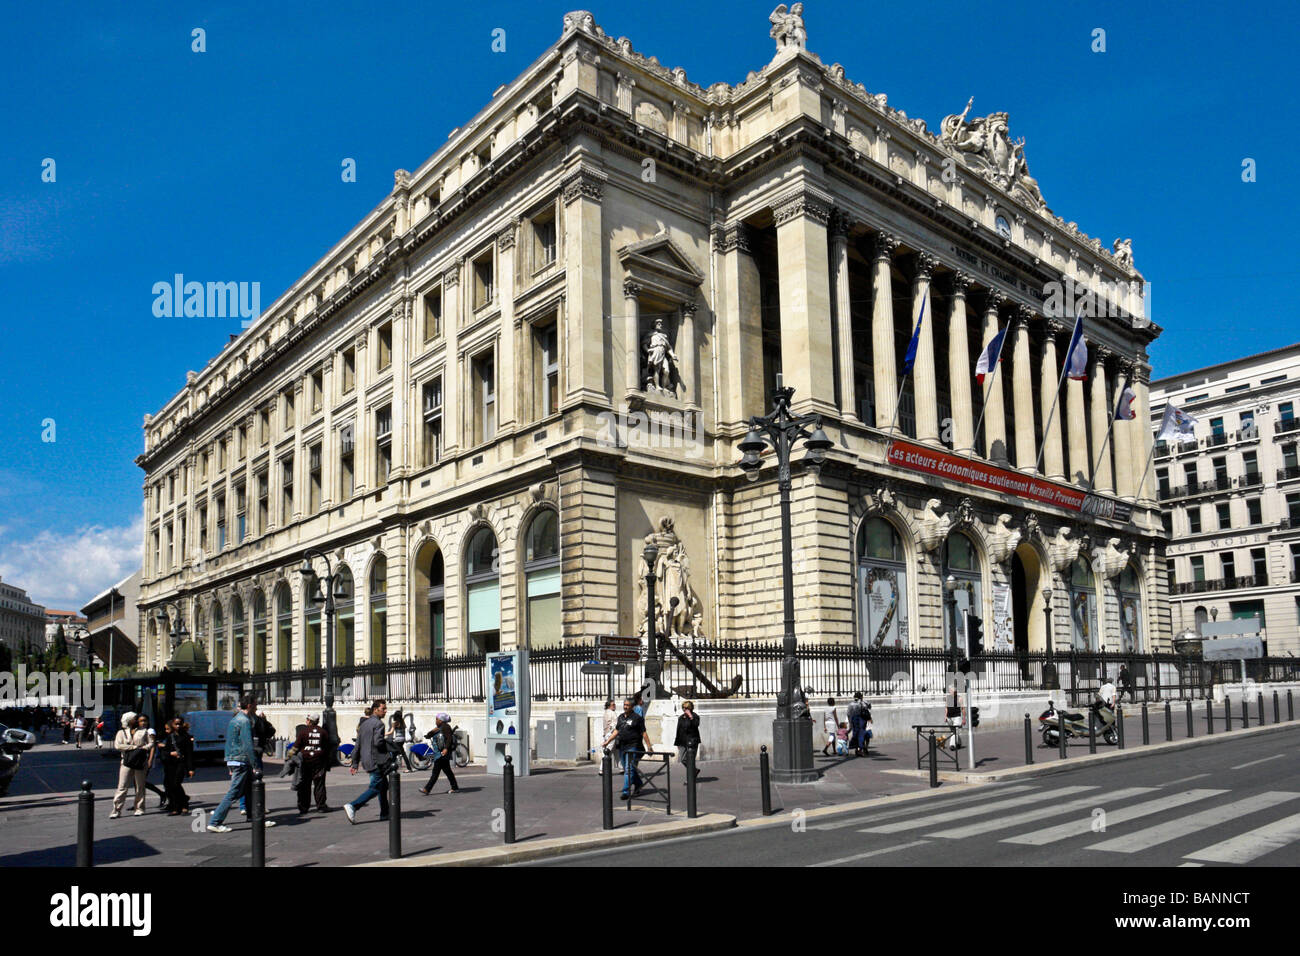 The impressive Chamber of Commerce building in Marseille France Stock Photo